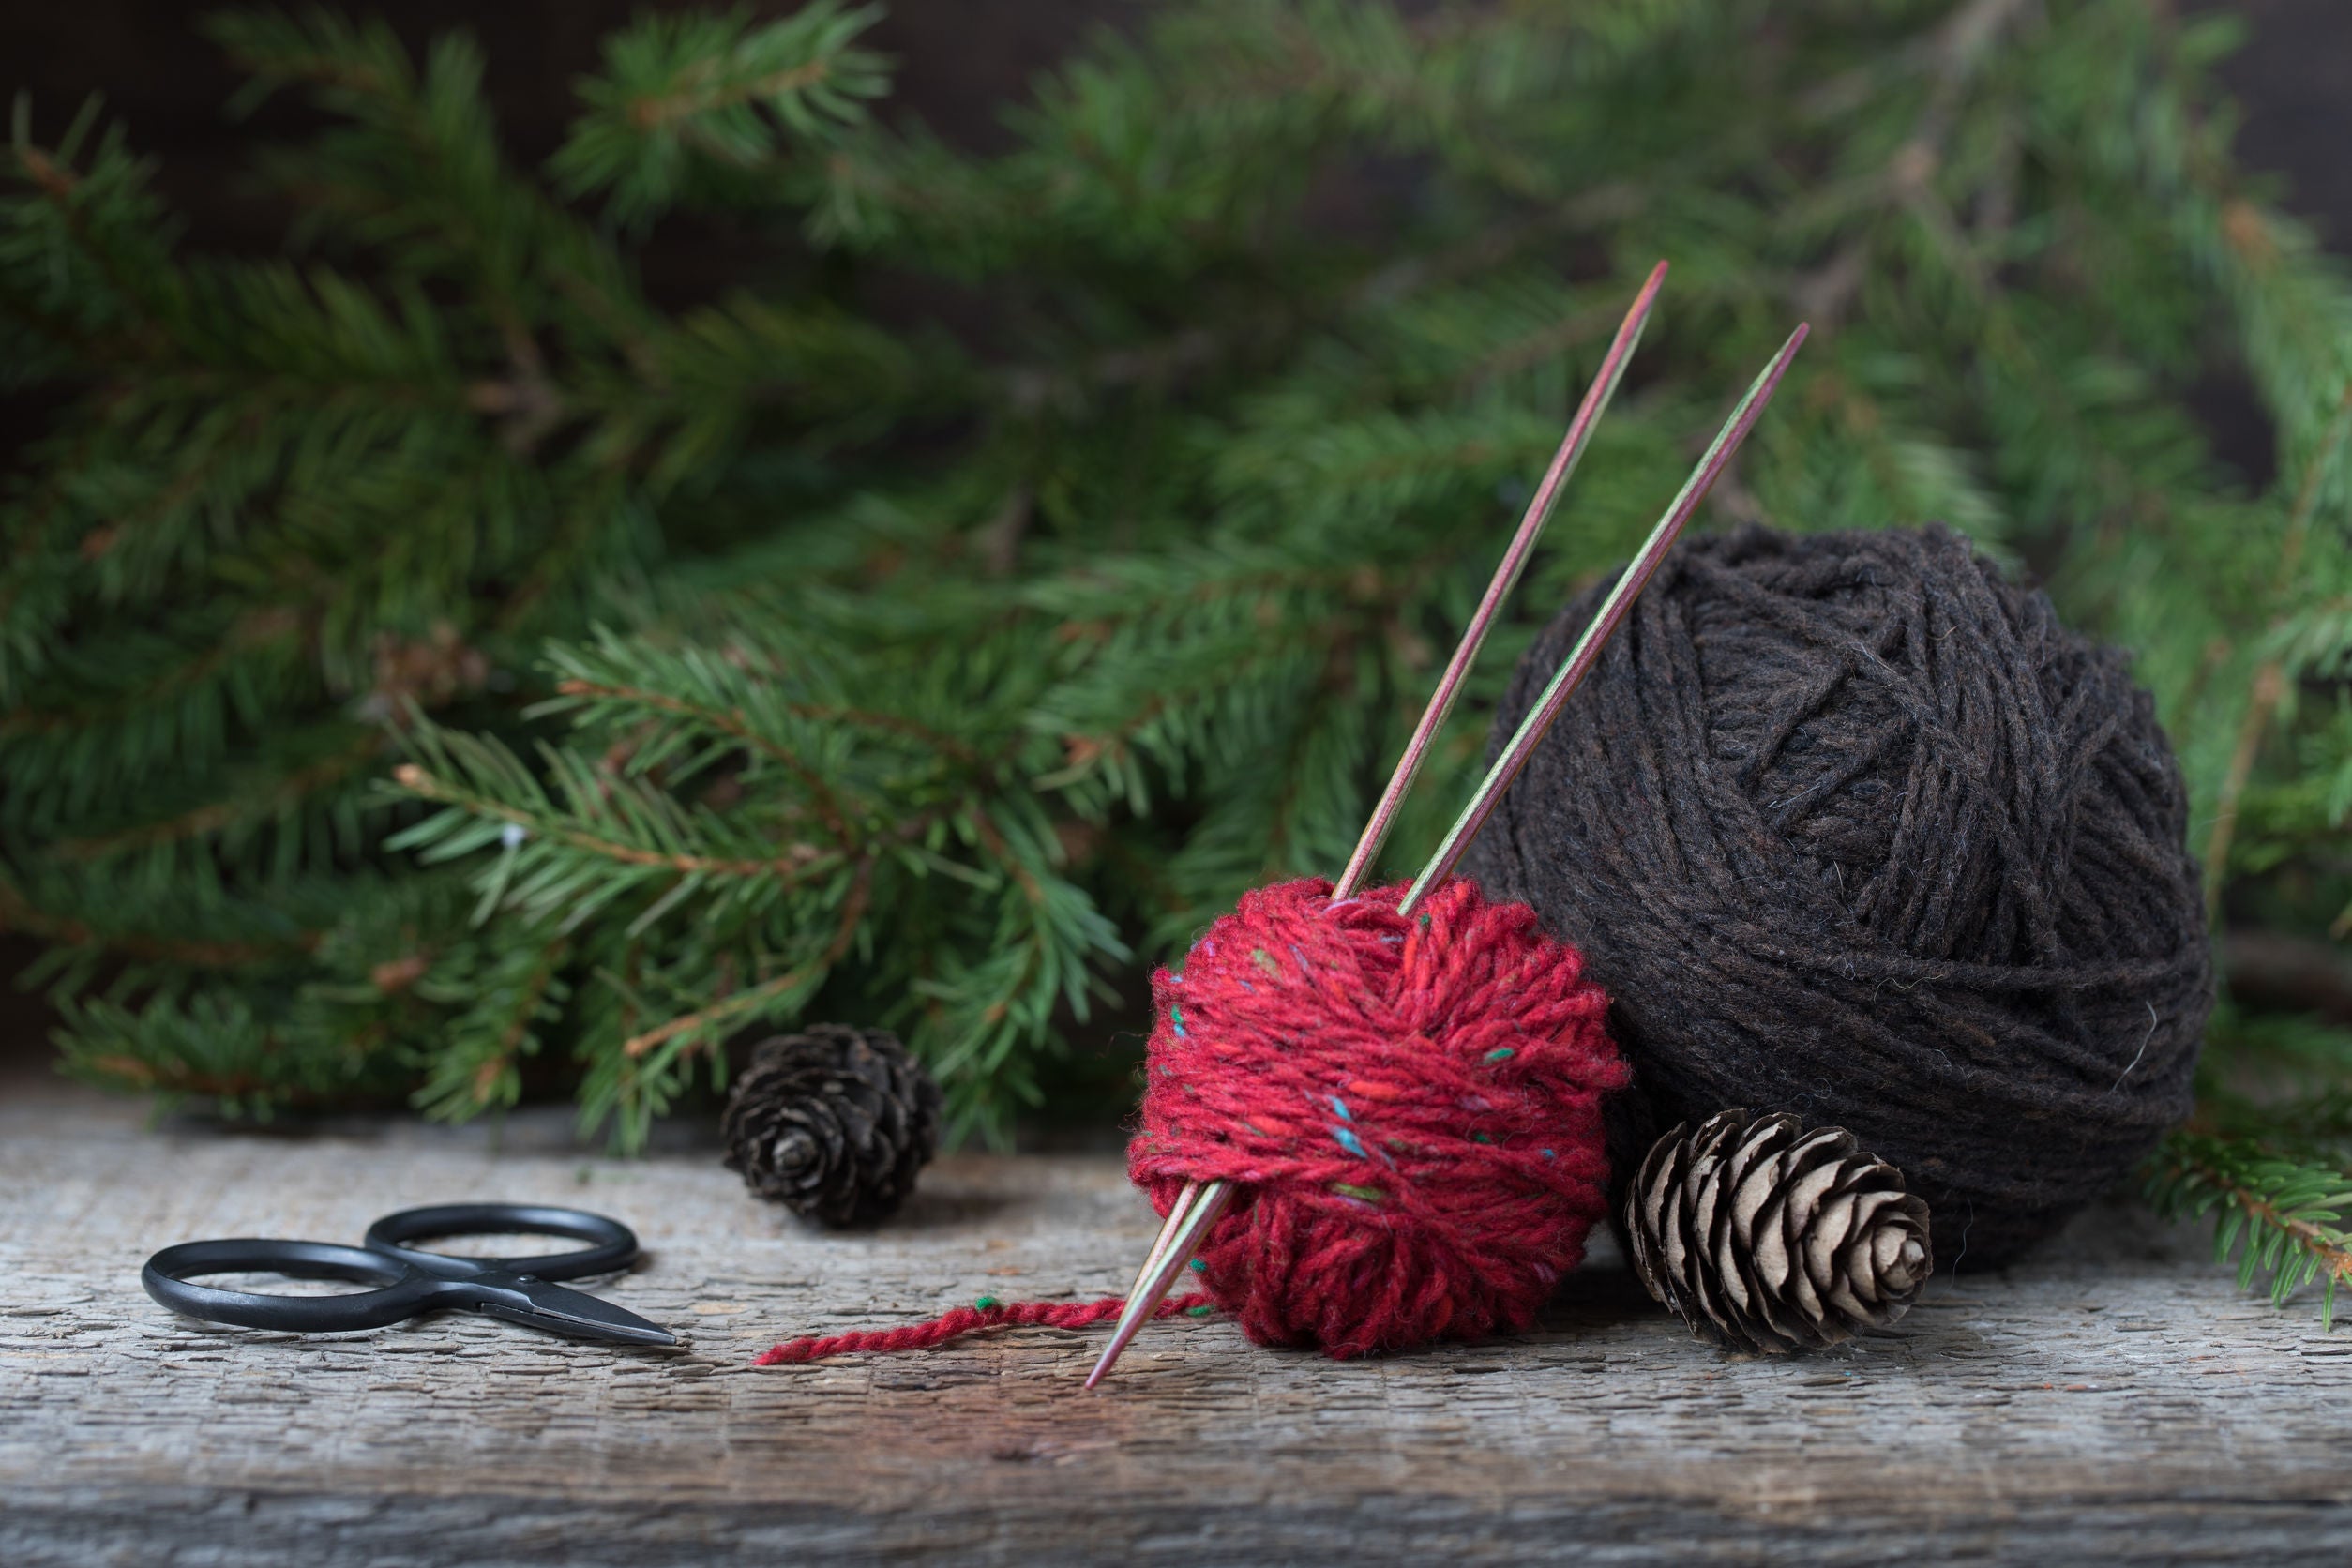 Get the Jump on Holiday Gift-Giving With These Wool Craft Ideas